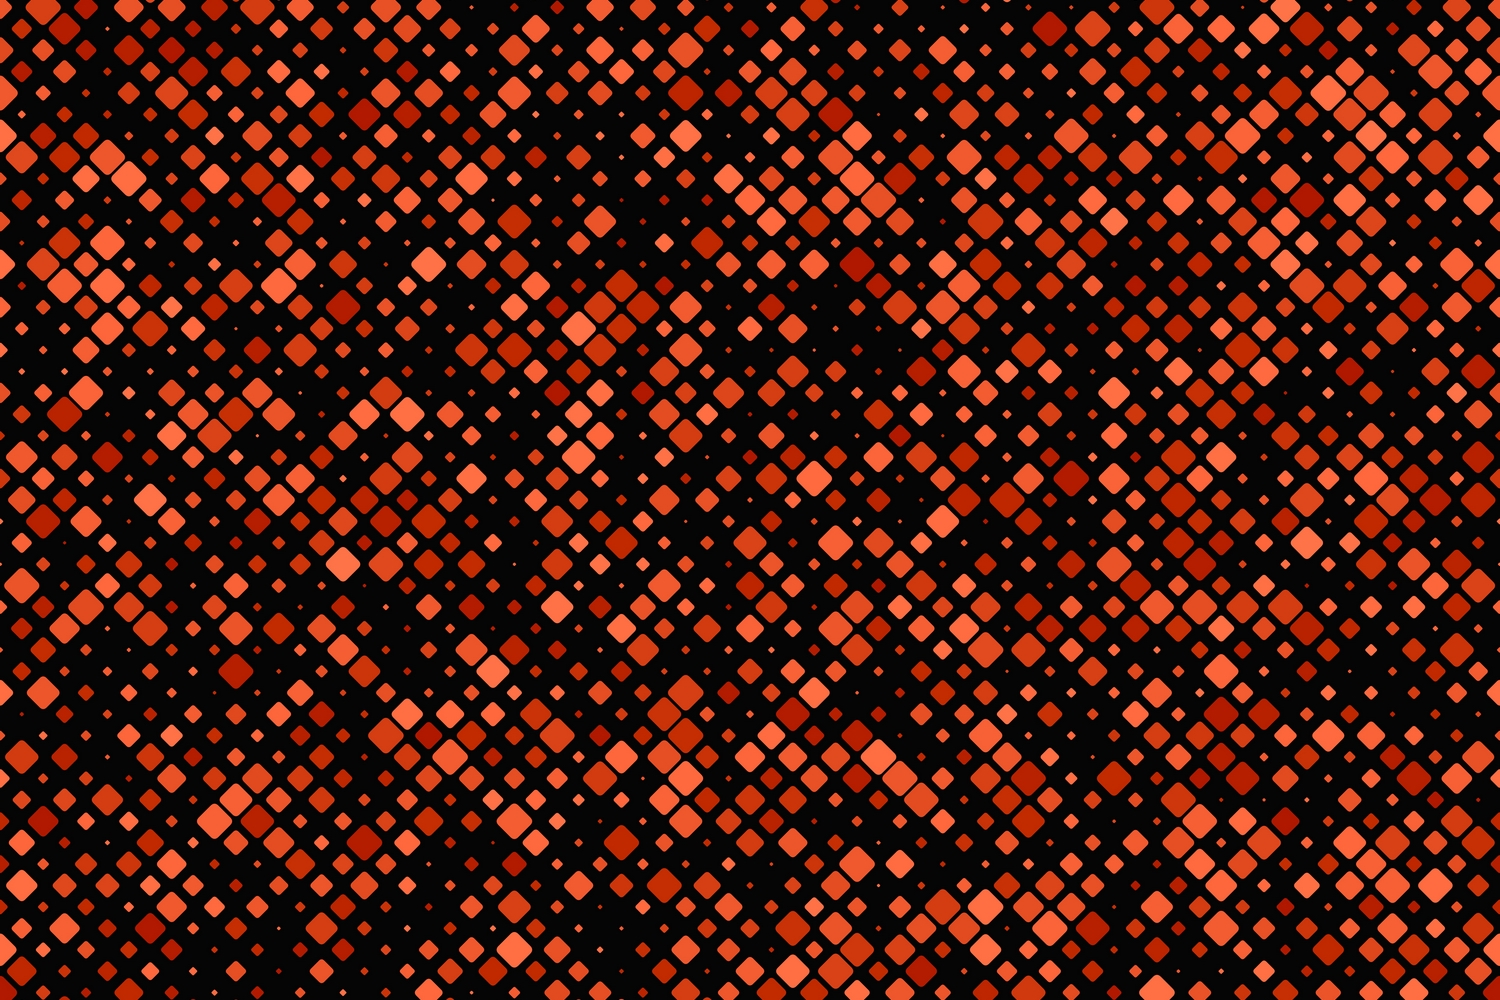 16 Seamless Square Backgrounds (AI, EPS, JPG 5000x5000)